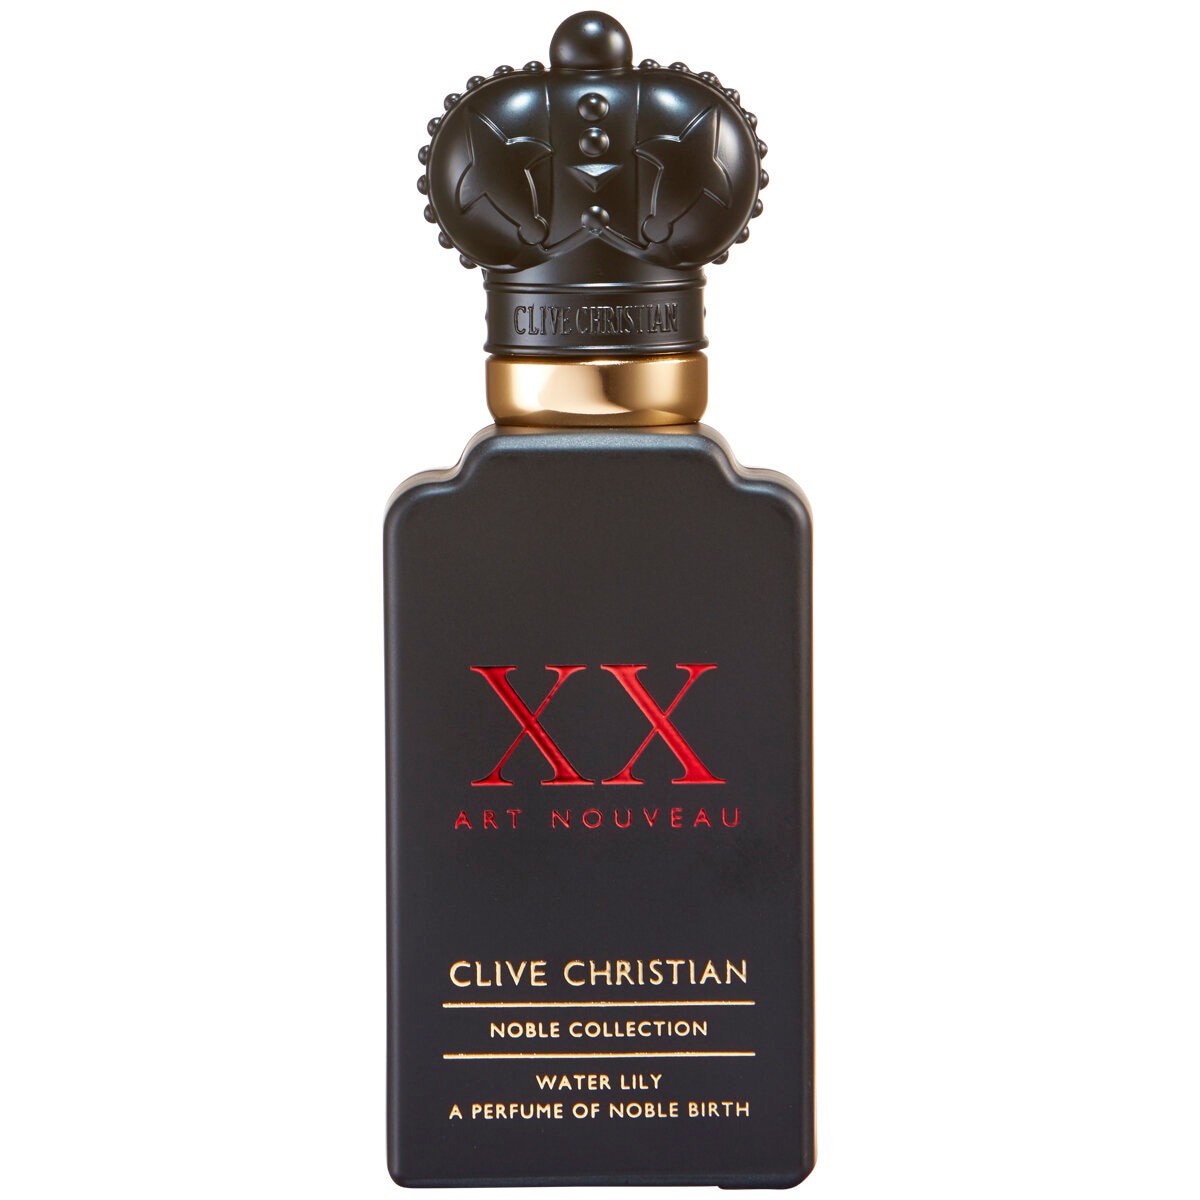 Clive Christian Womens Noble Collection XX Art Nouveau Water Lily Perfume Spray 50ml